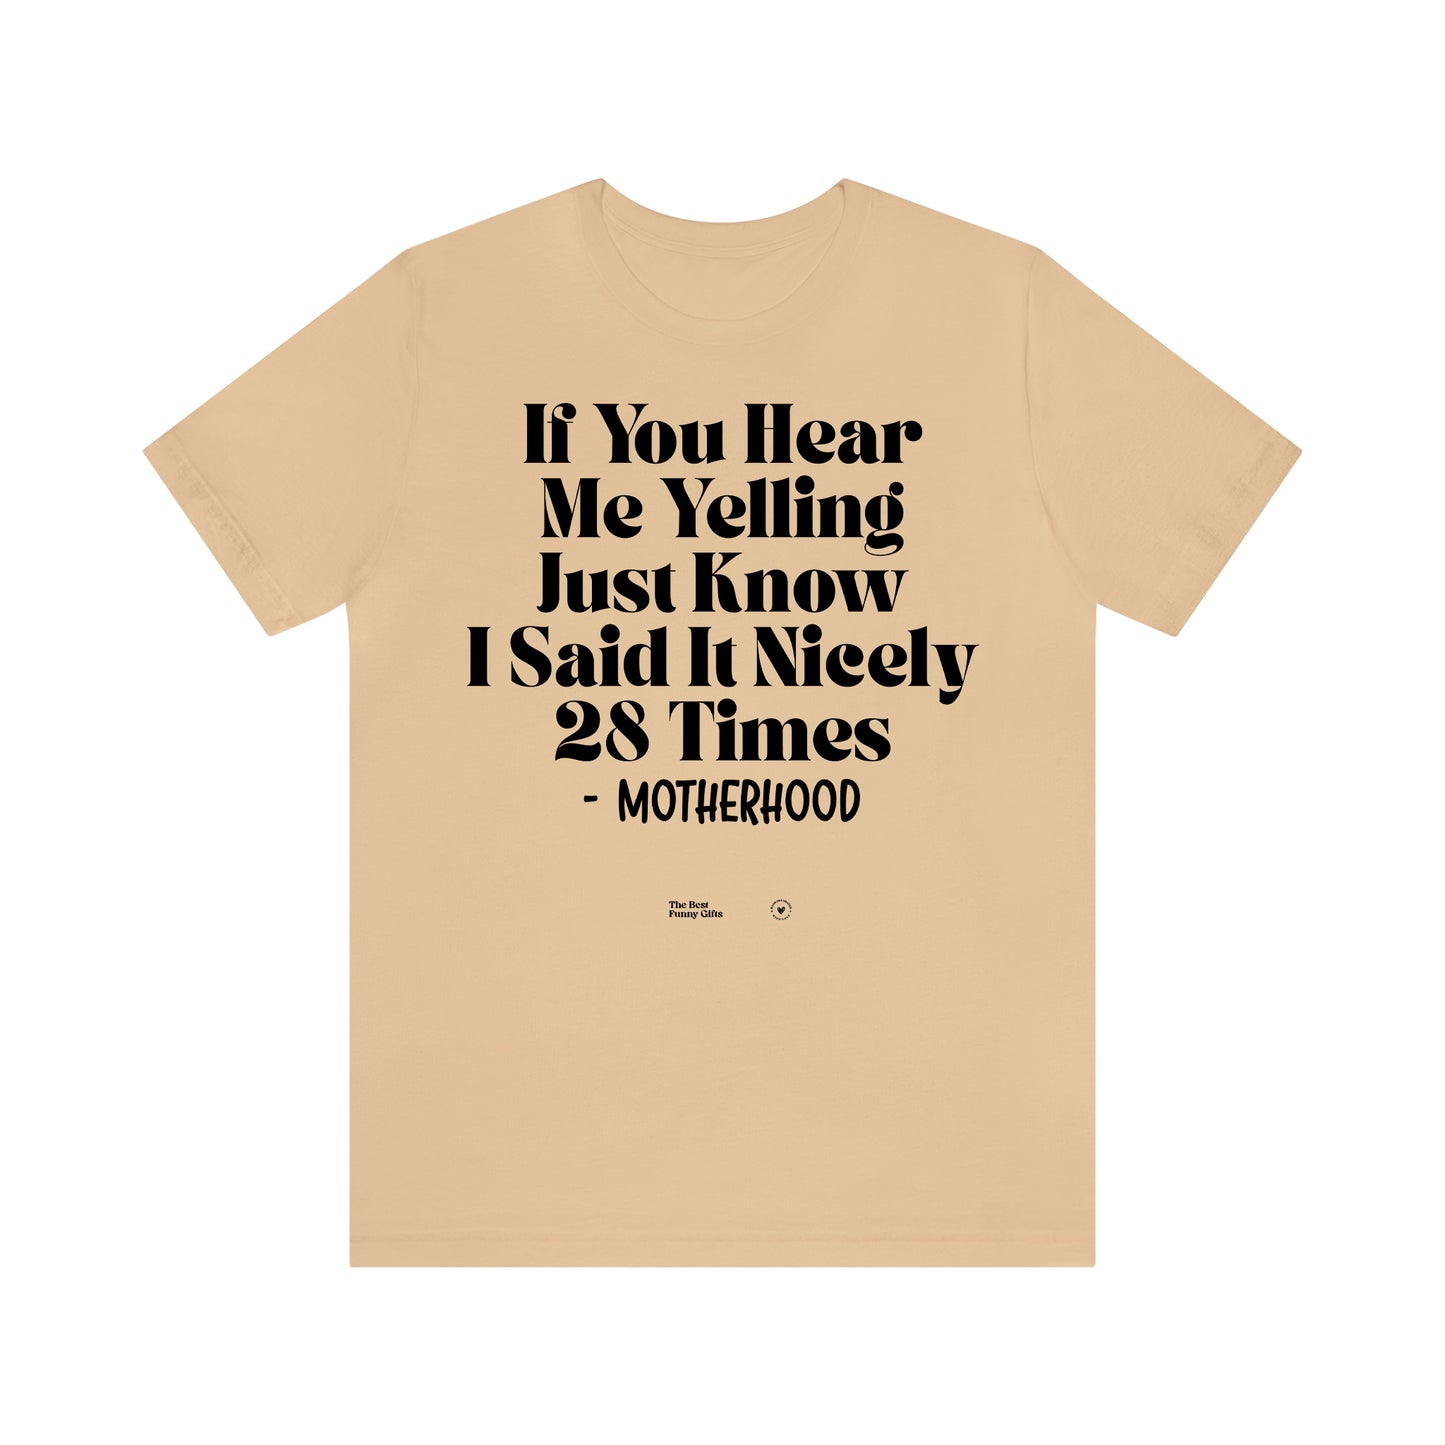 Funny Shirts for Women - If You Hear Me Yelling Just Know I Said It Nicely 28 Times - Motherhood - Women’s T Shirts